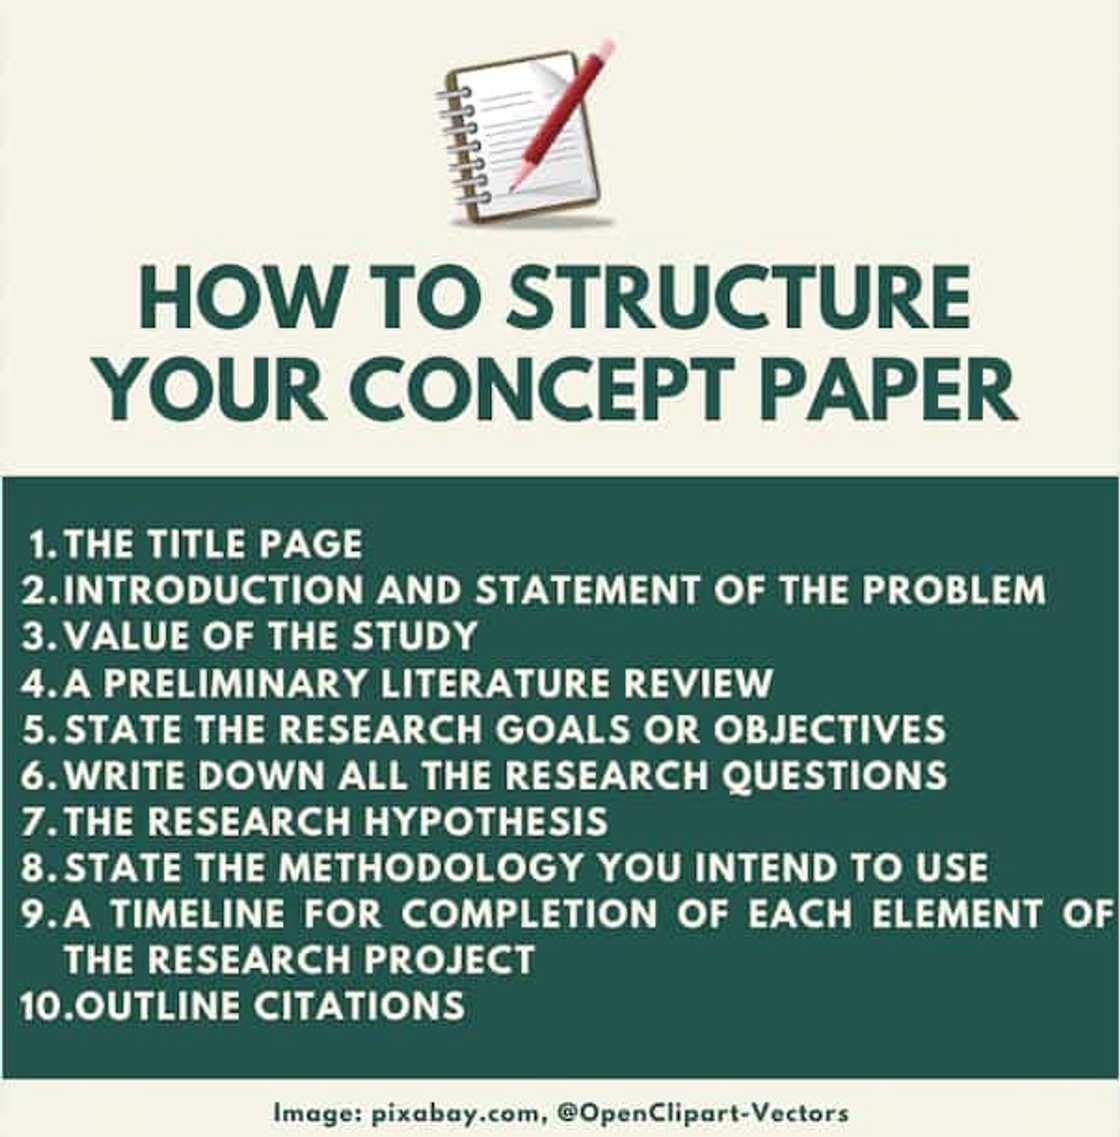 How to structure a concept paper